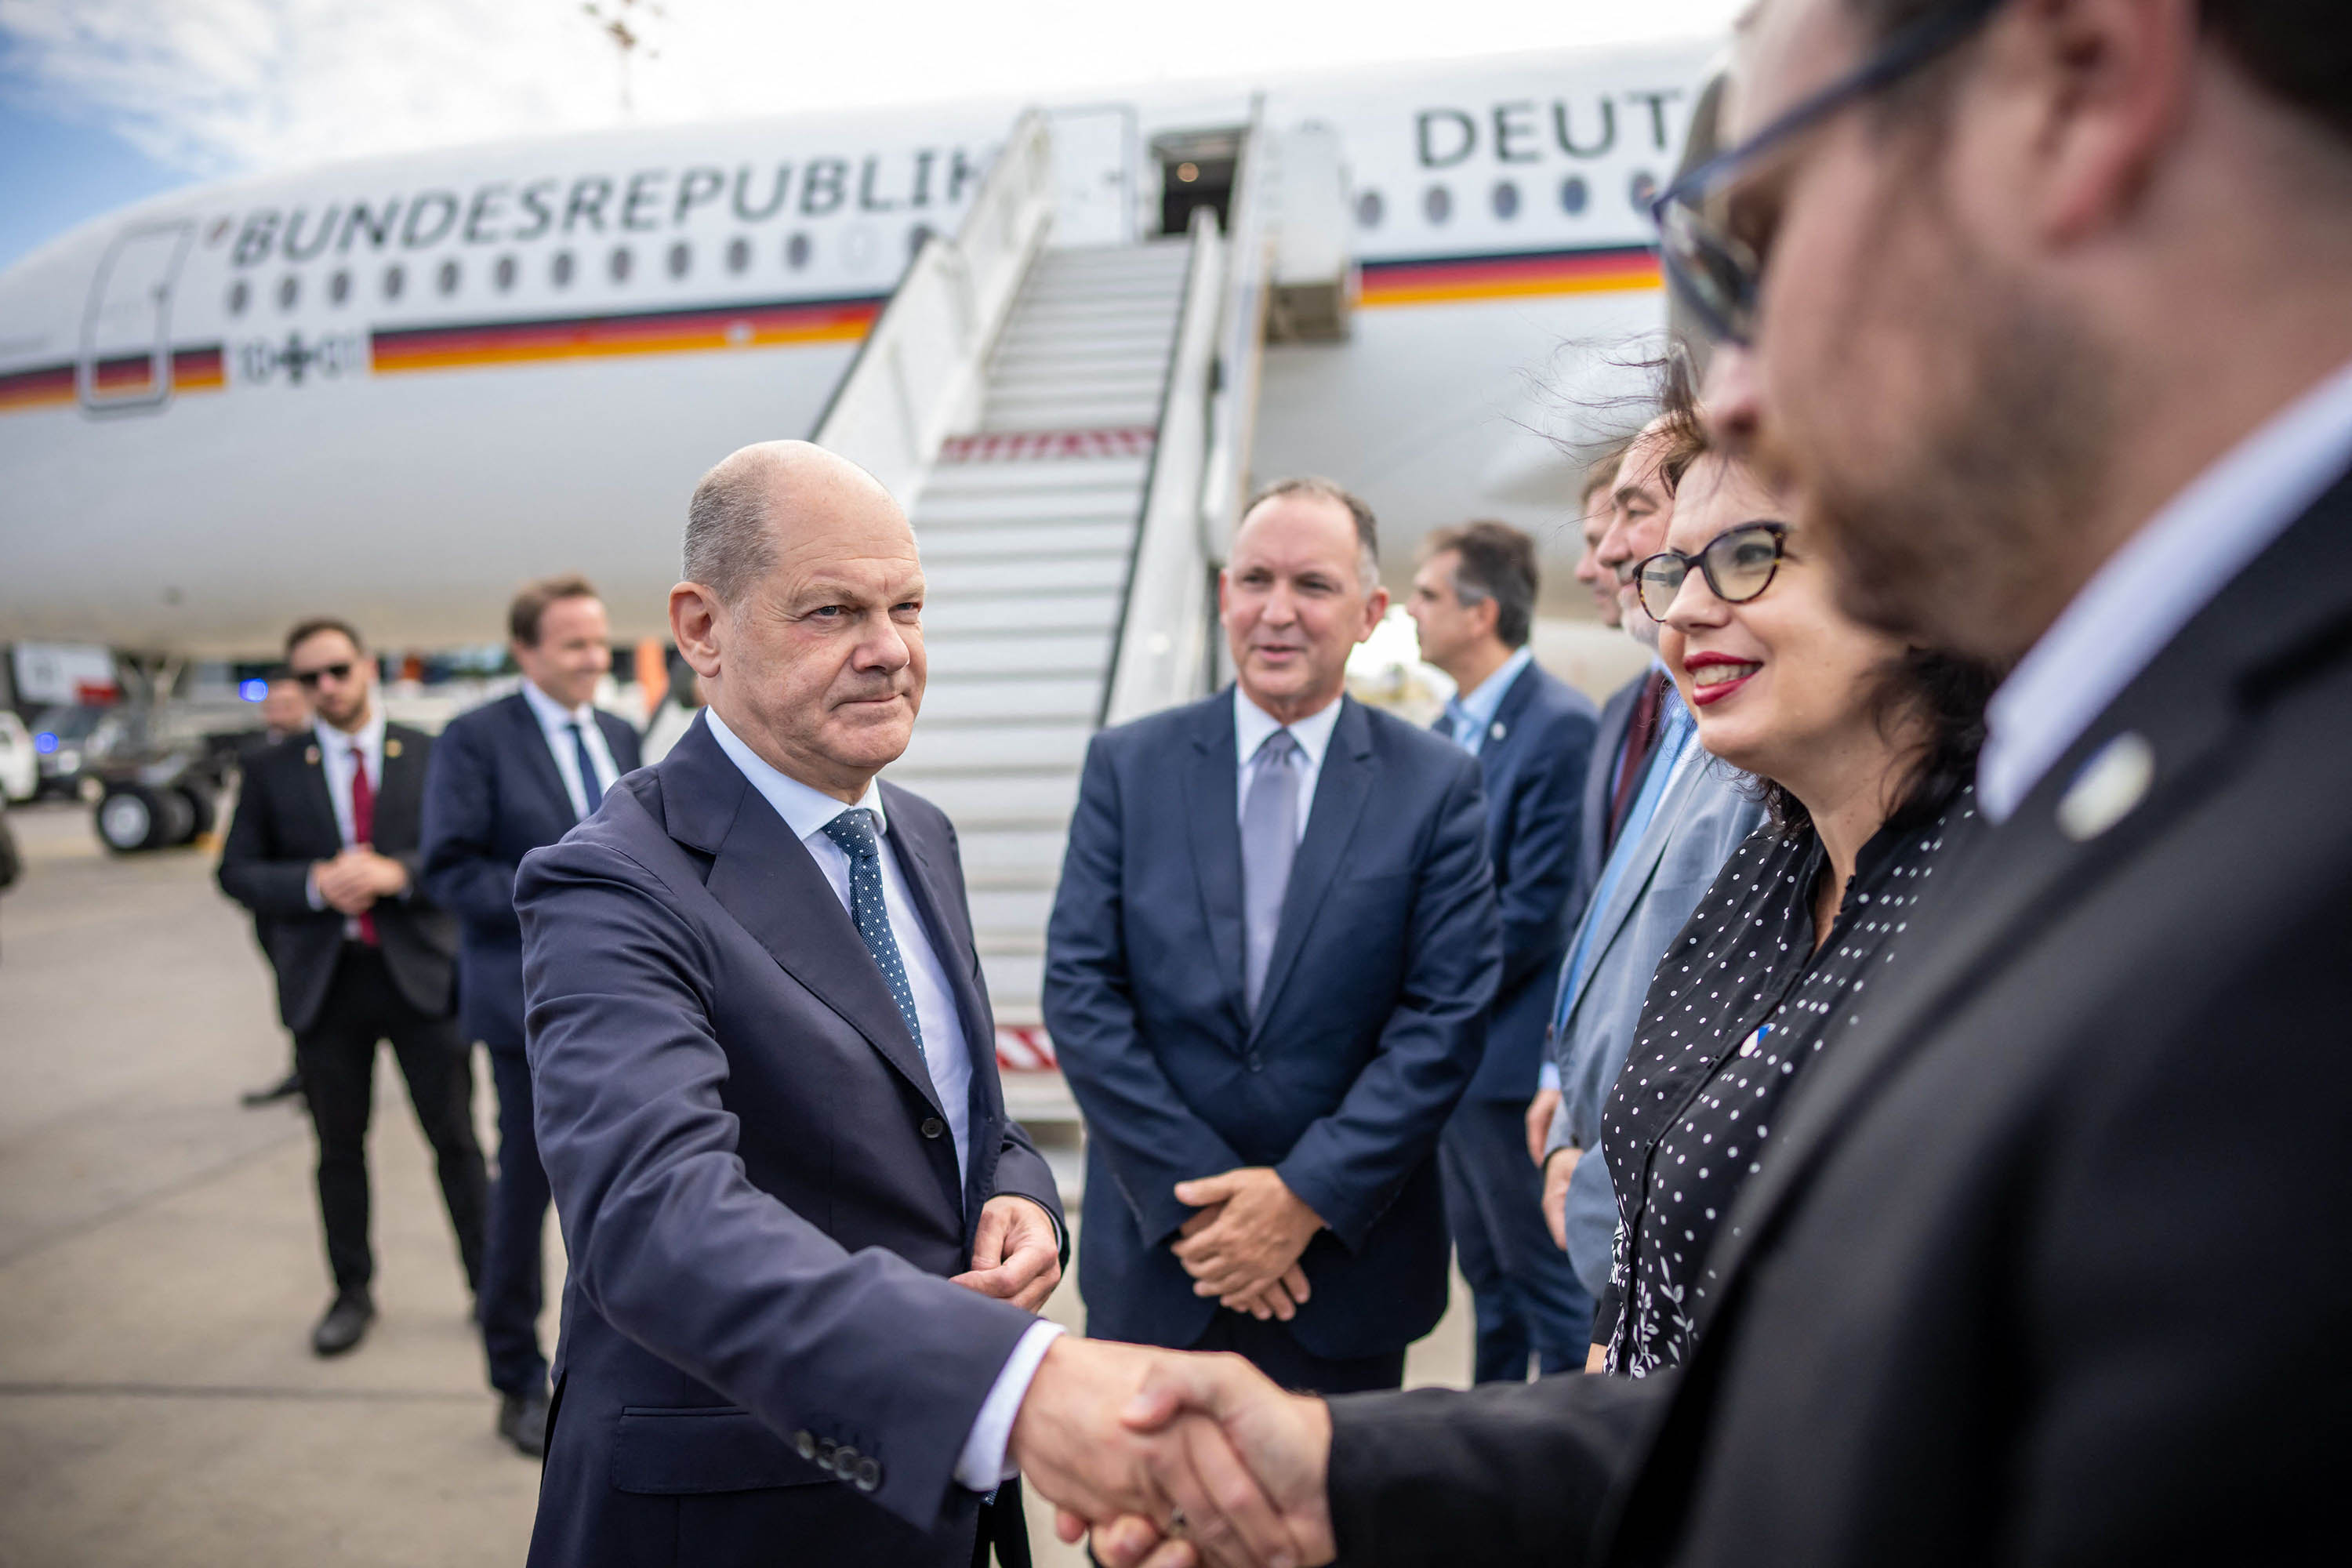 German Chancellor Olaf Scholz, center, shakes hands with delegation members after landing at the Ben Gurion airport in Tel Aviv, Israel, on October 17. 